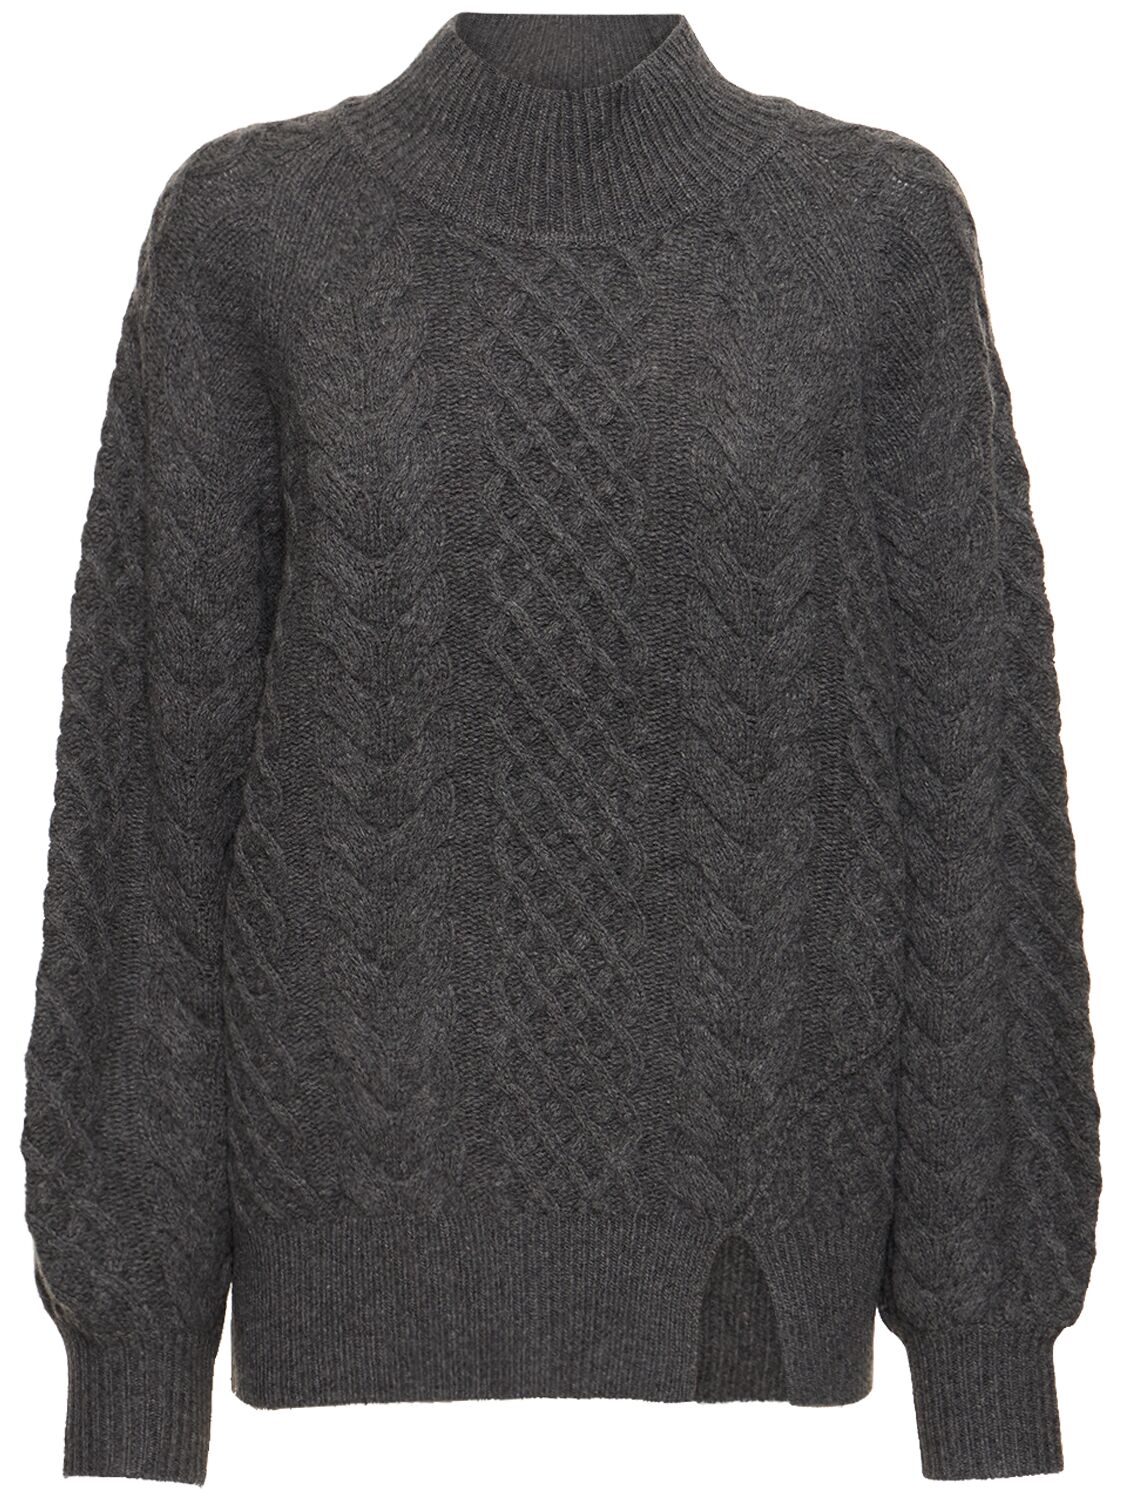 The Garment Como Wool Blend Cable Knit Jumper In Heather Grey